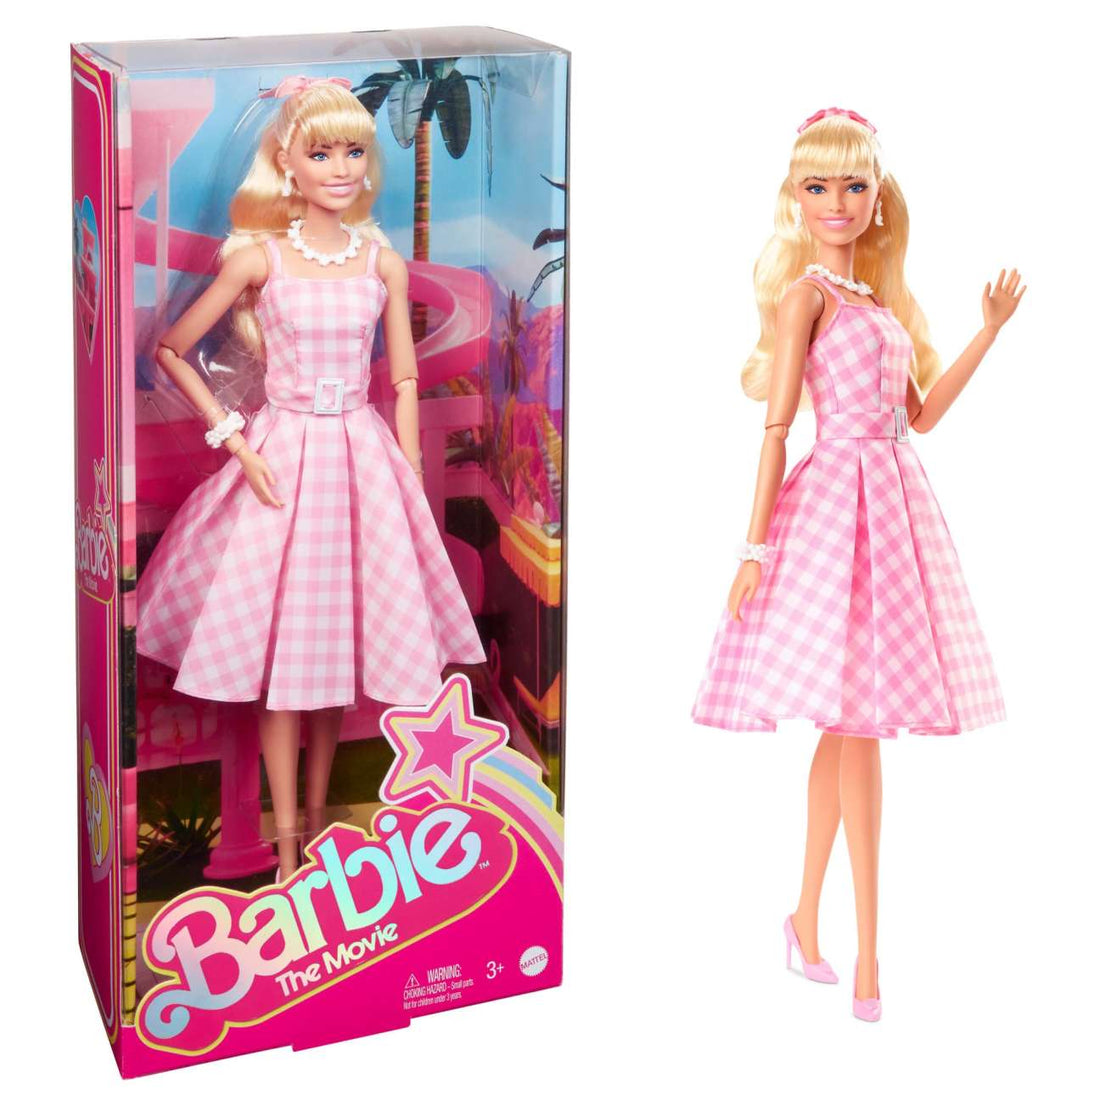 Barbie the Movie Collectible Doll, Margot Robbie As Barbie In Pink Gingham Dress - Dolls and Accessories